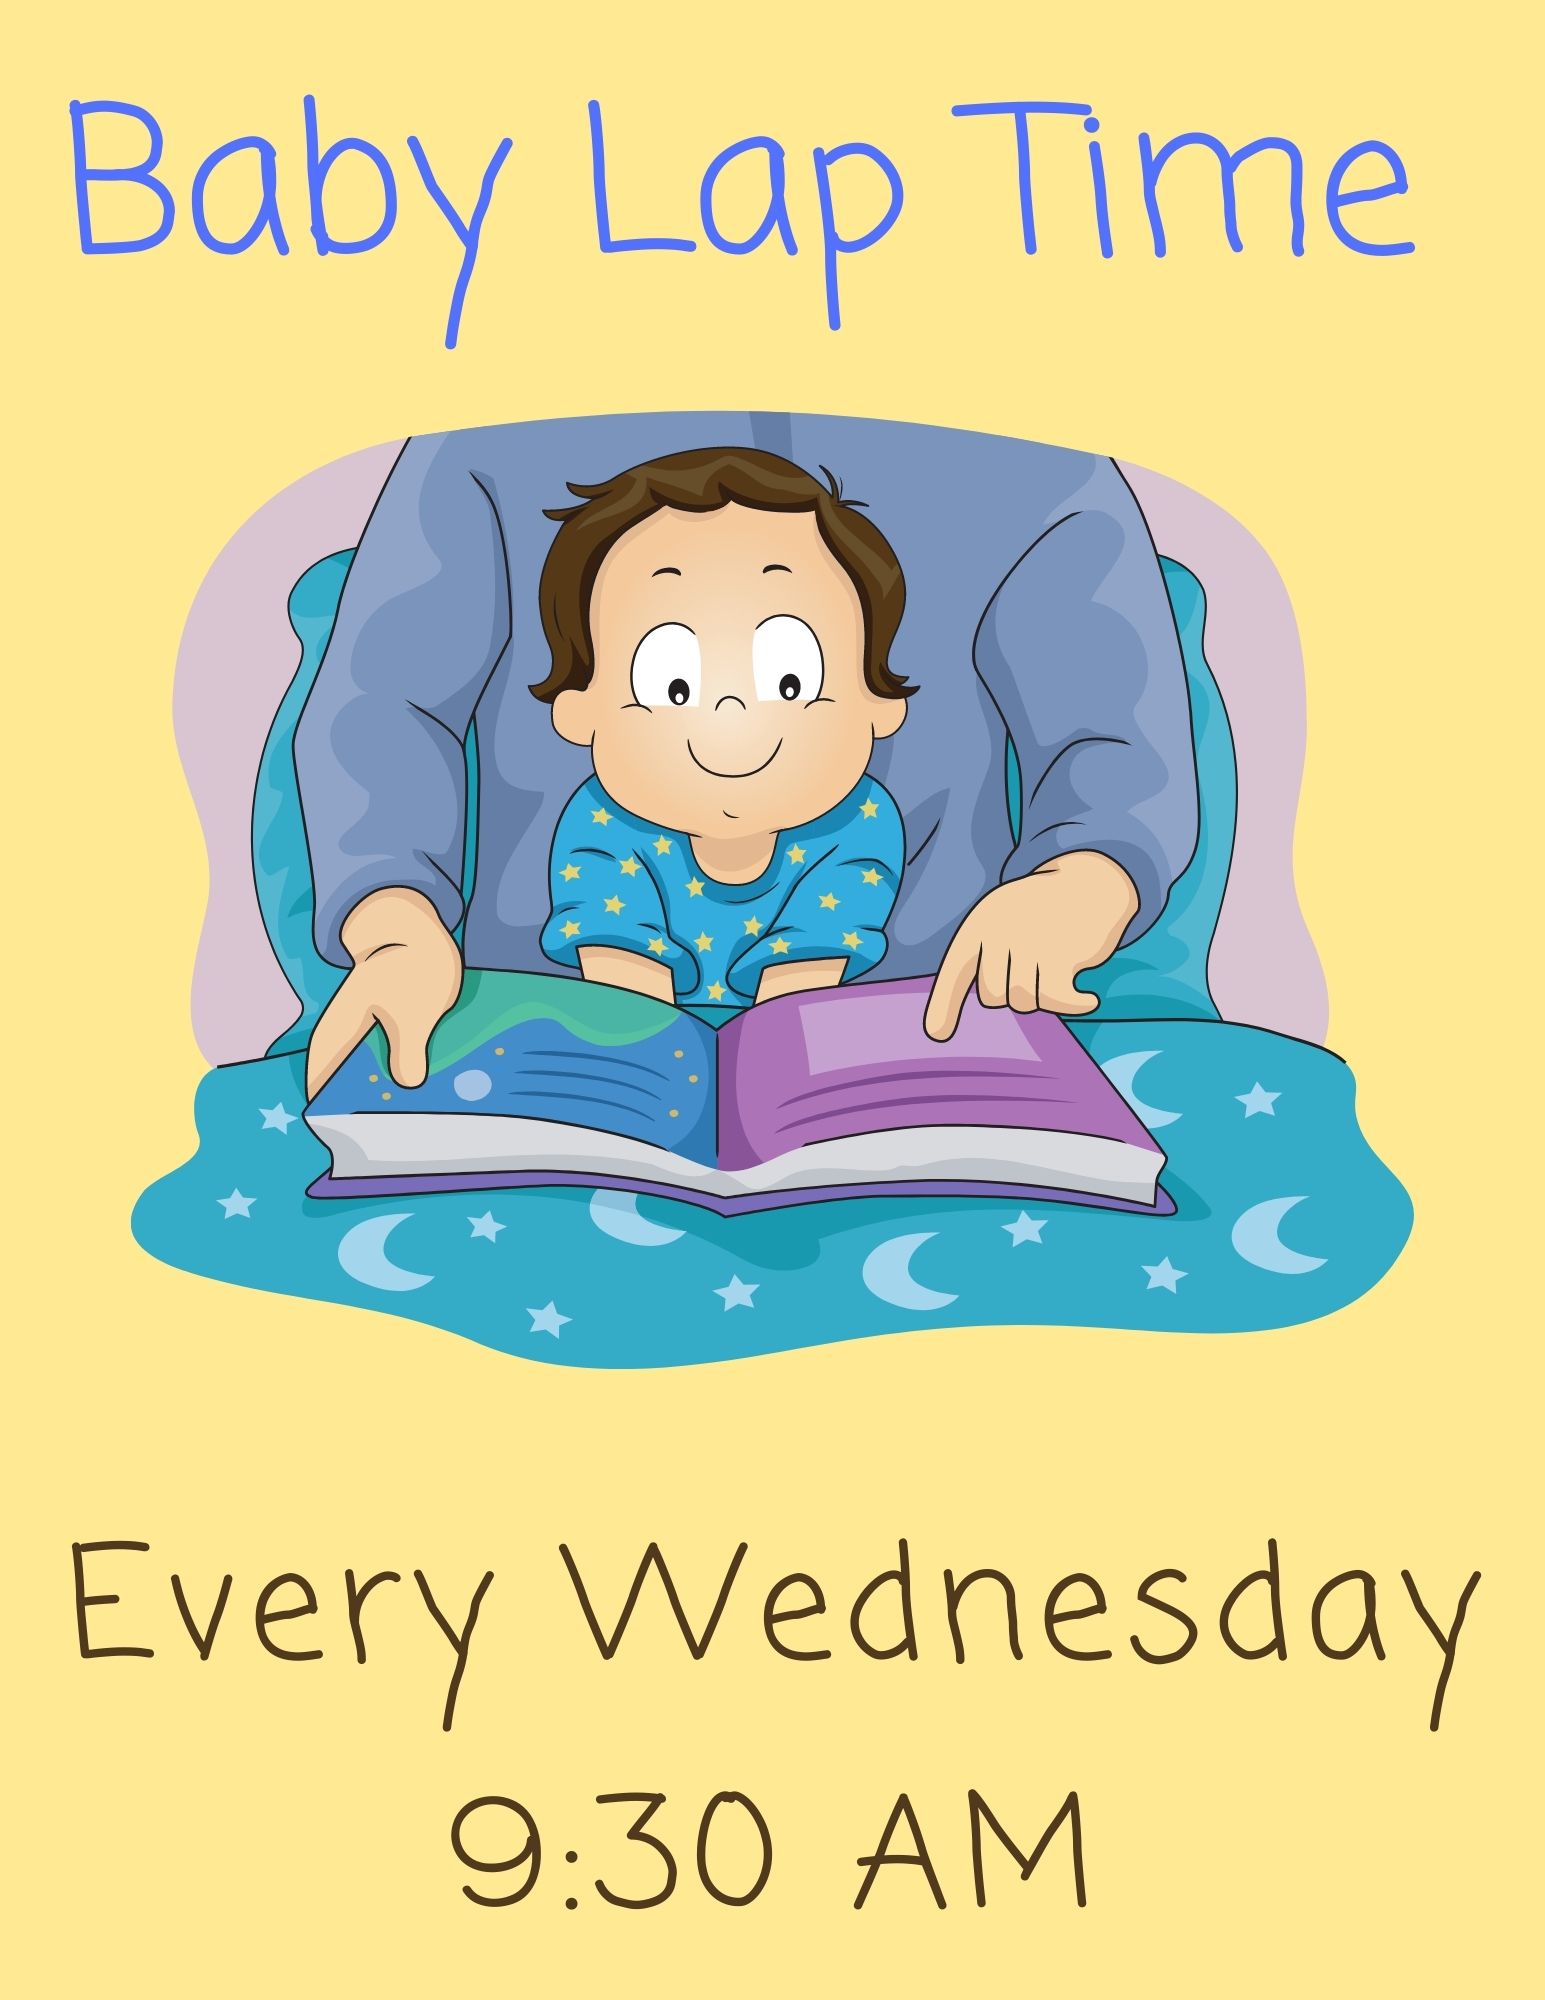 Baby Lap Time every Wednesday 9:30 AM